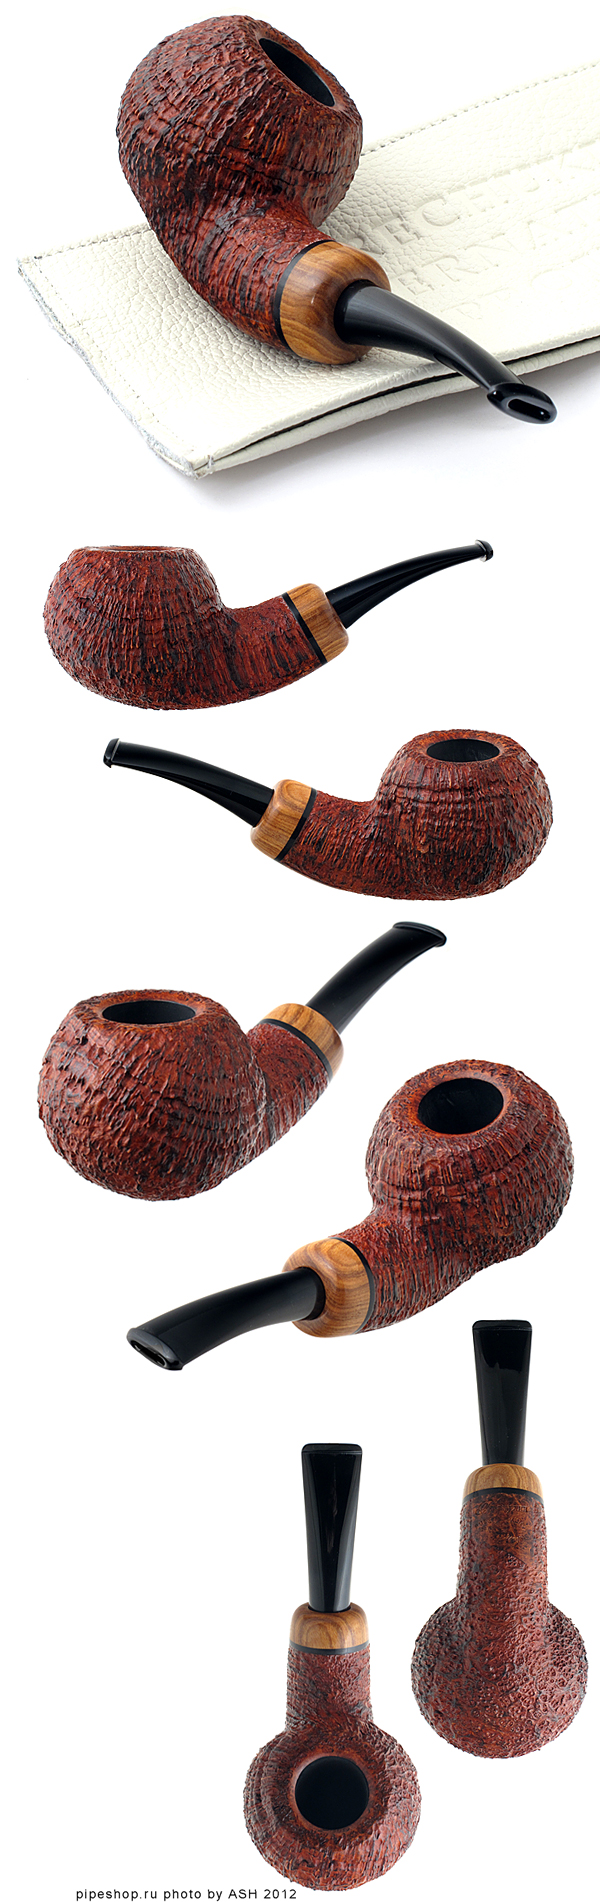   H. TOKUTOMI -  BROWN SANDBLAST SLIGHTLY BENT CHUBBY APPLE WITH OLIVEWOOD